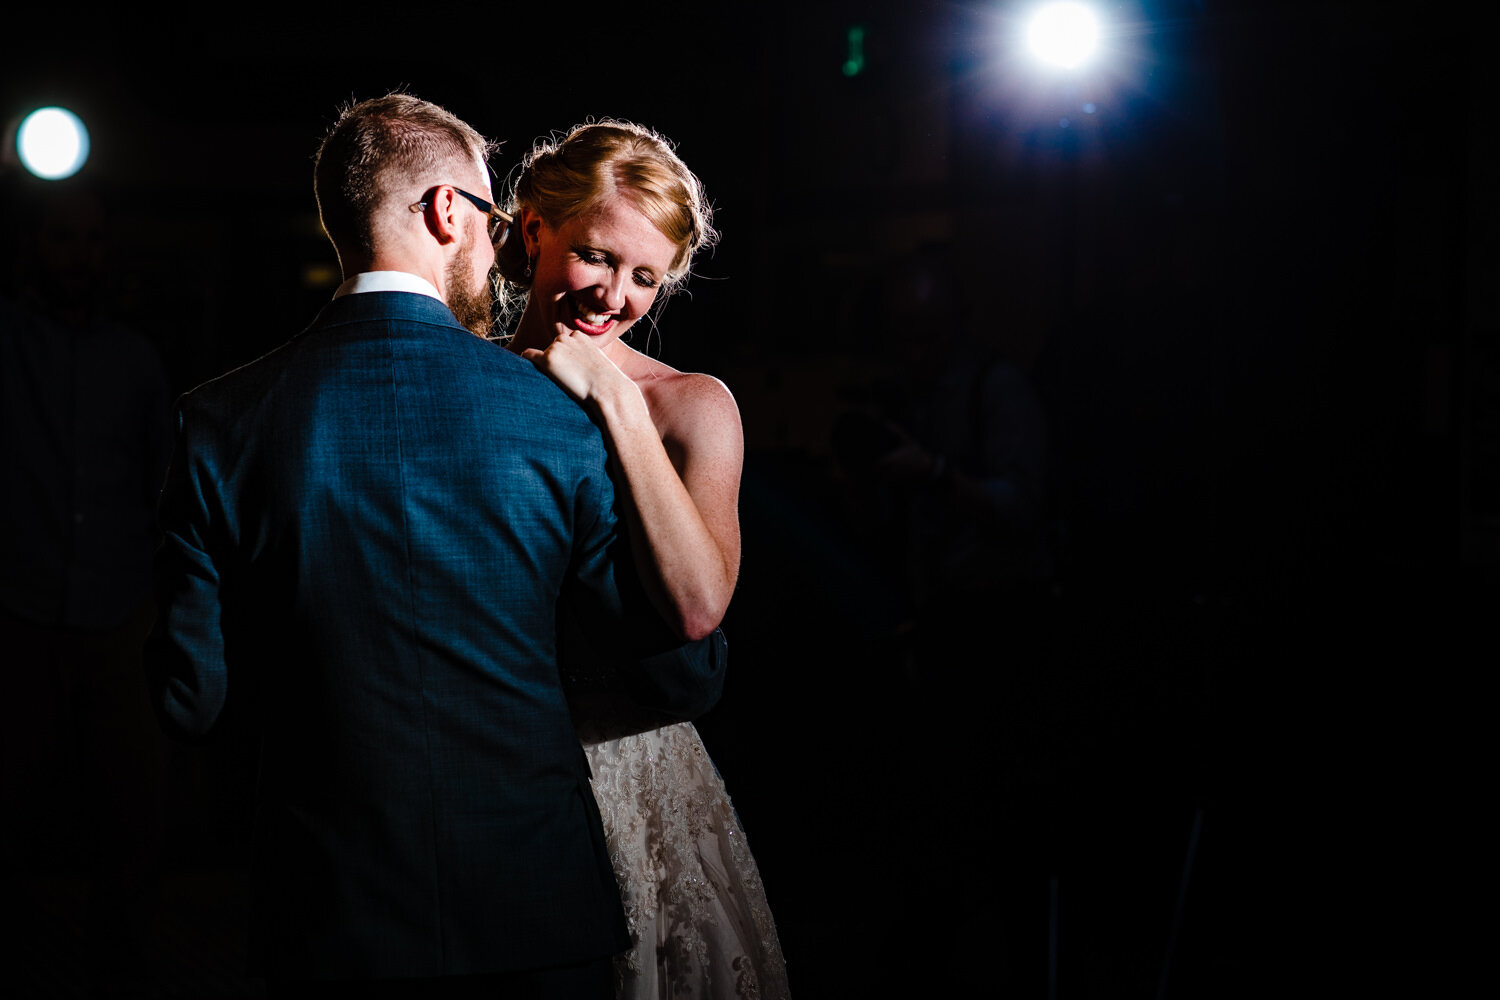  Boulder Colorado wedding at Under the Sun Eatery and Pizzeria by wedding photographer, JMGant Photography 